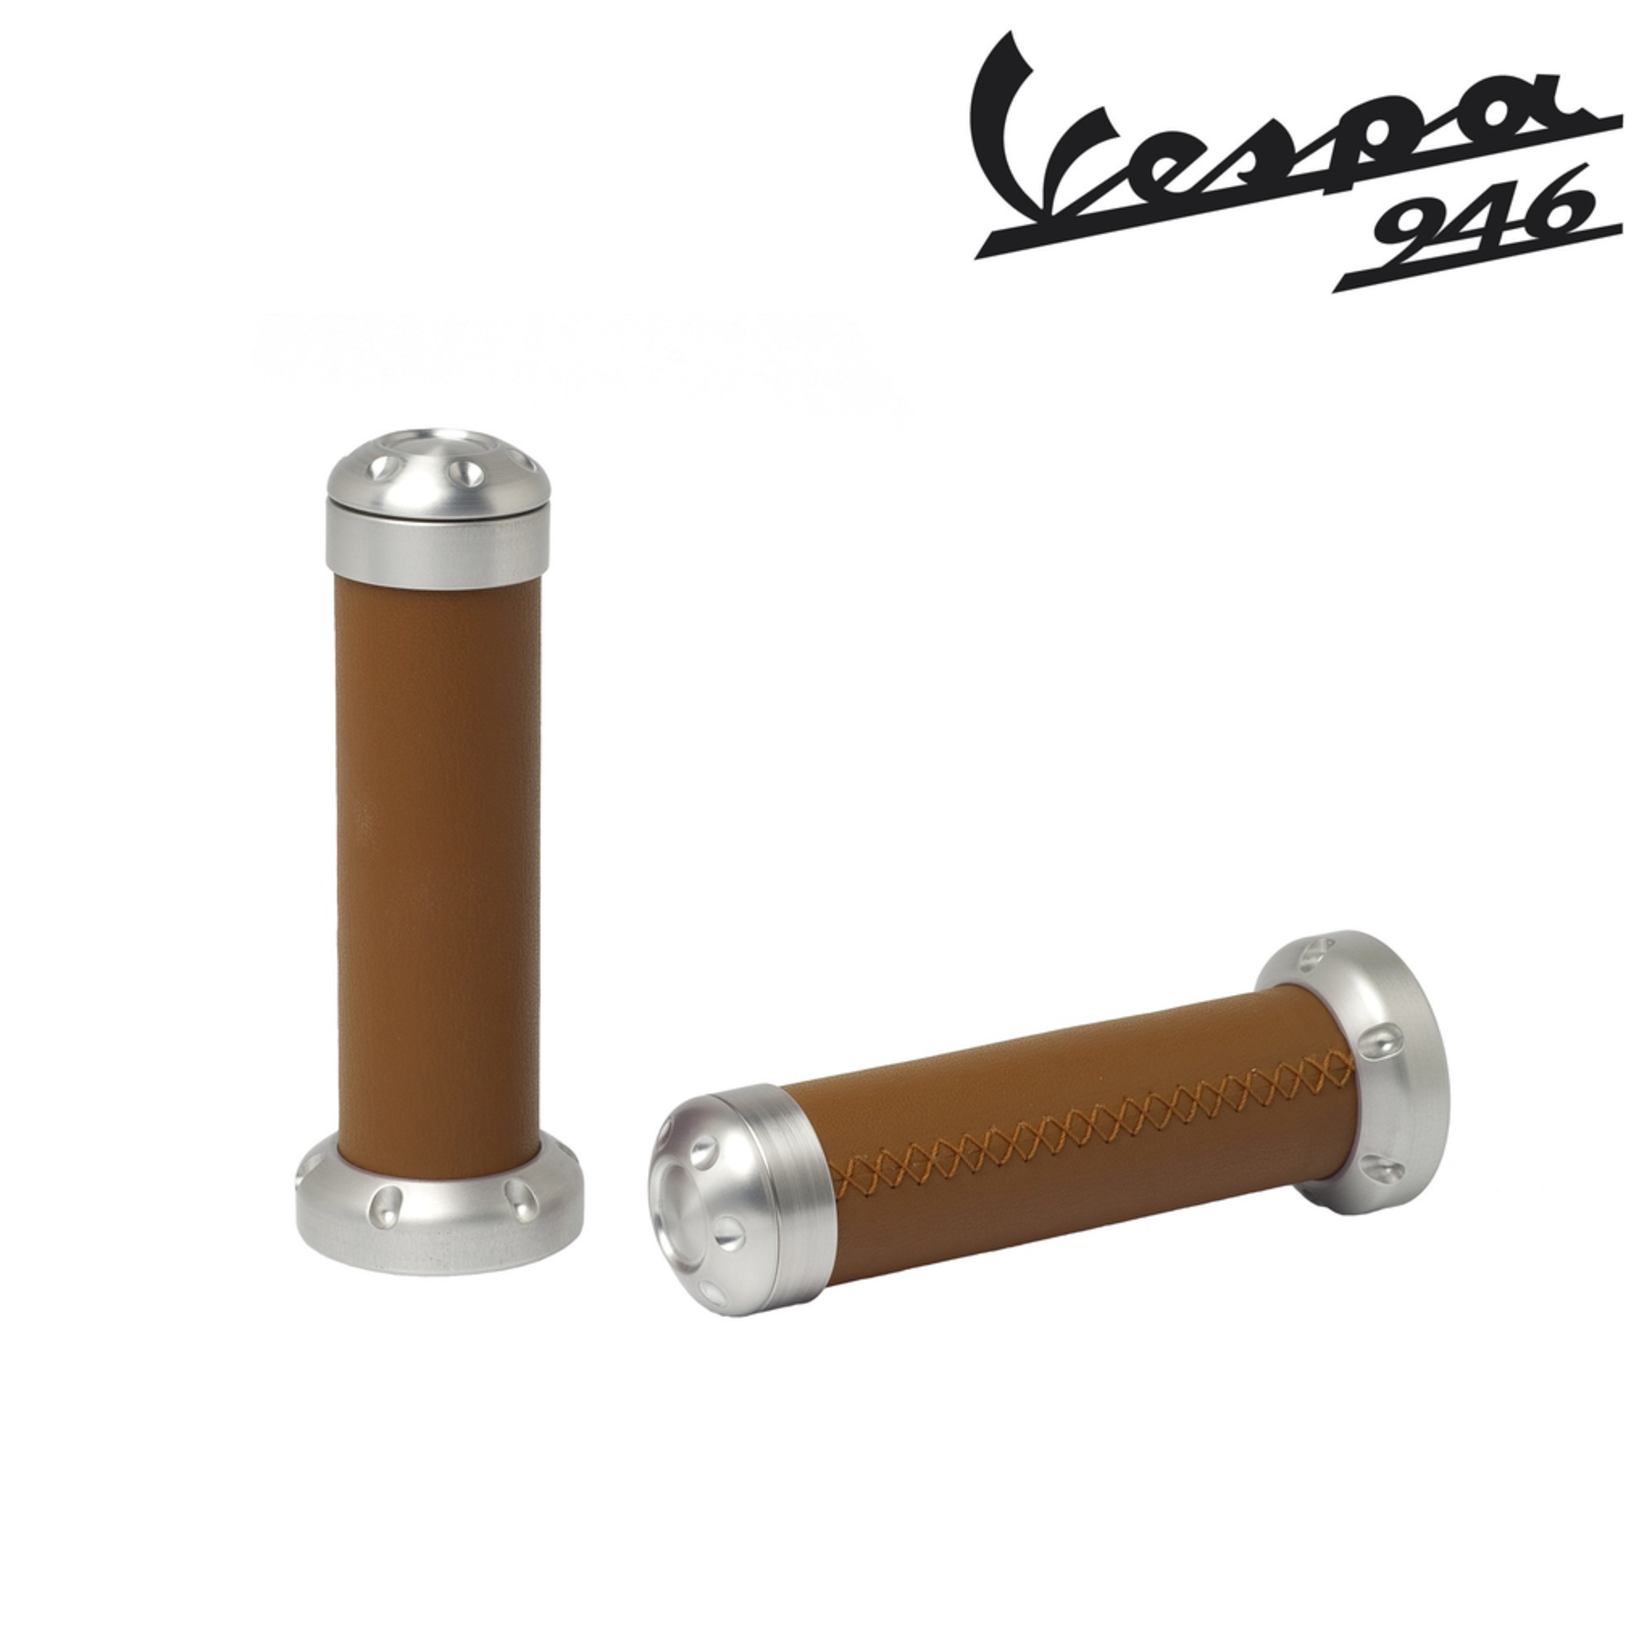 Accessories Hand Grip, Vespa 946 Brown Leather